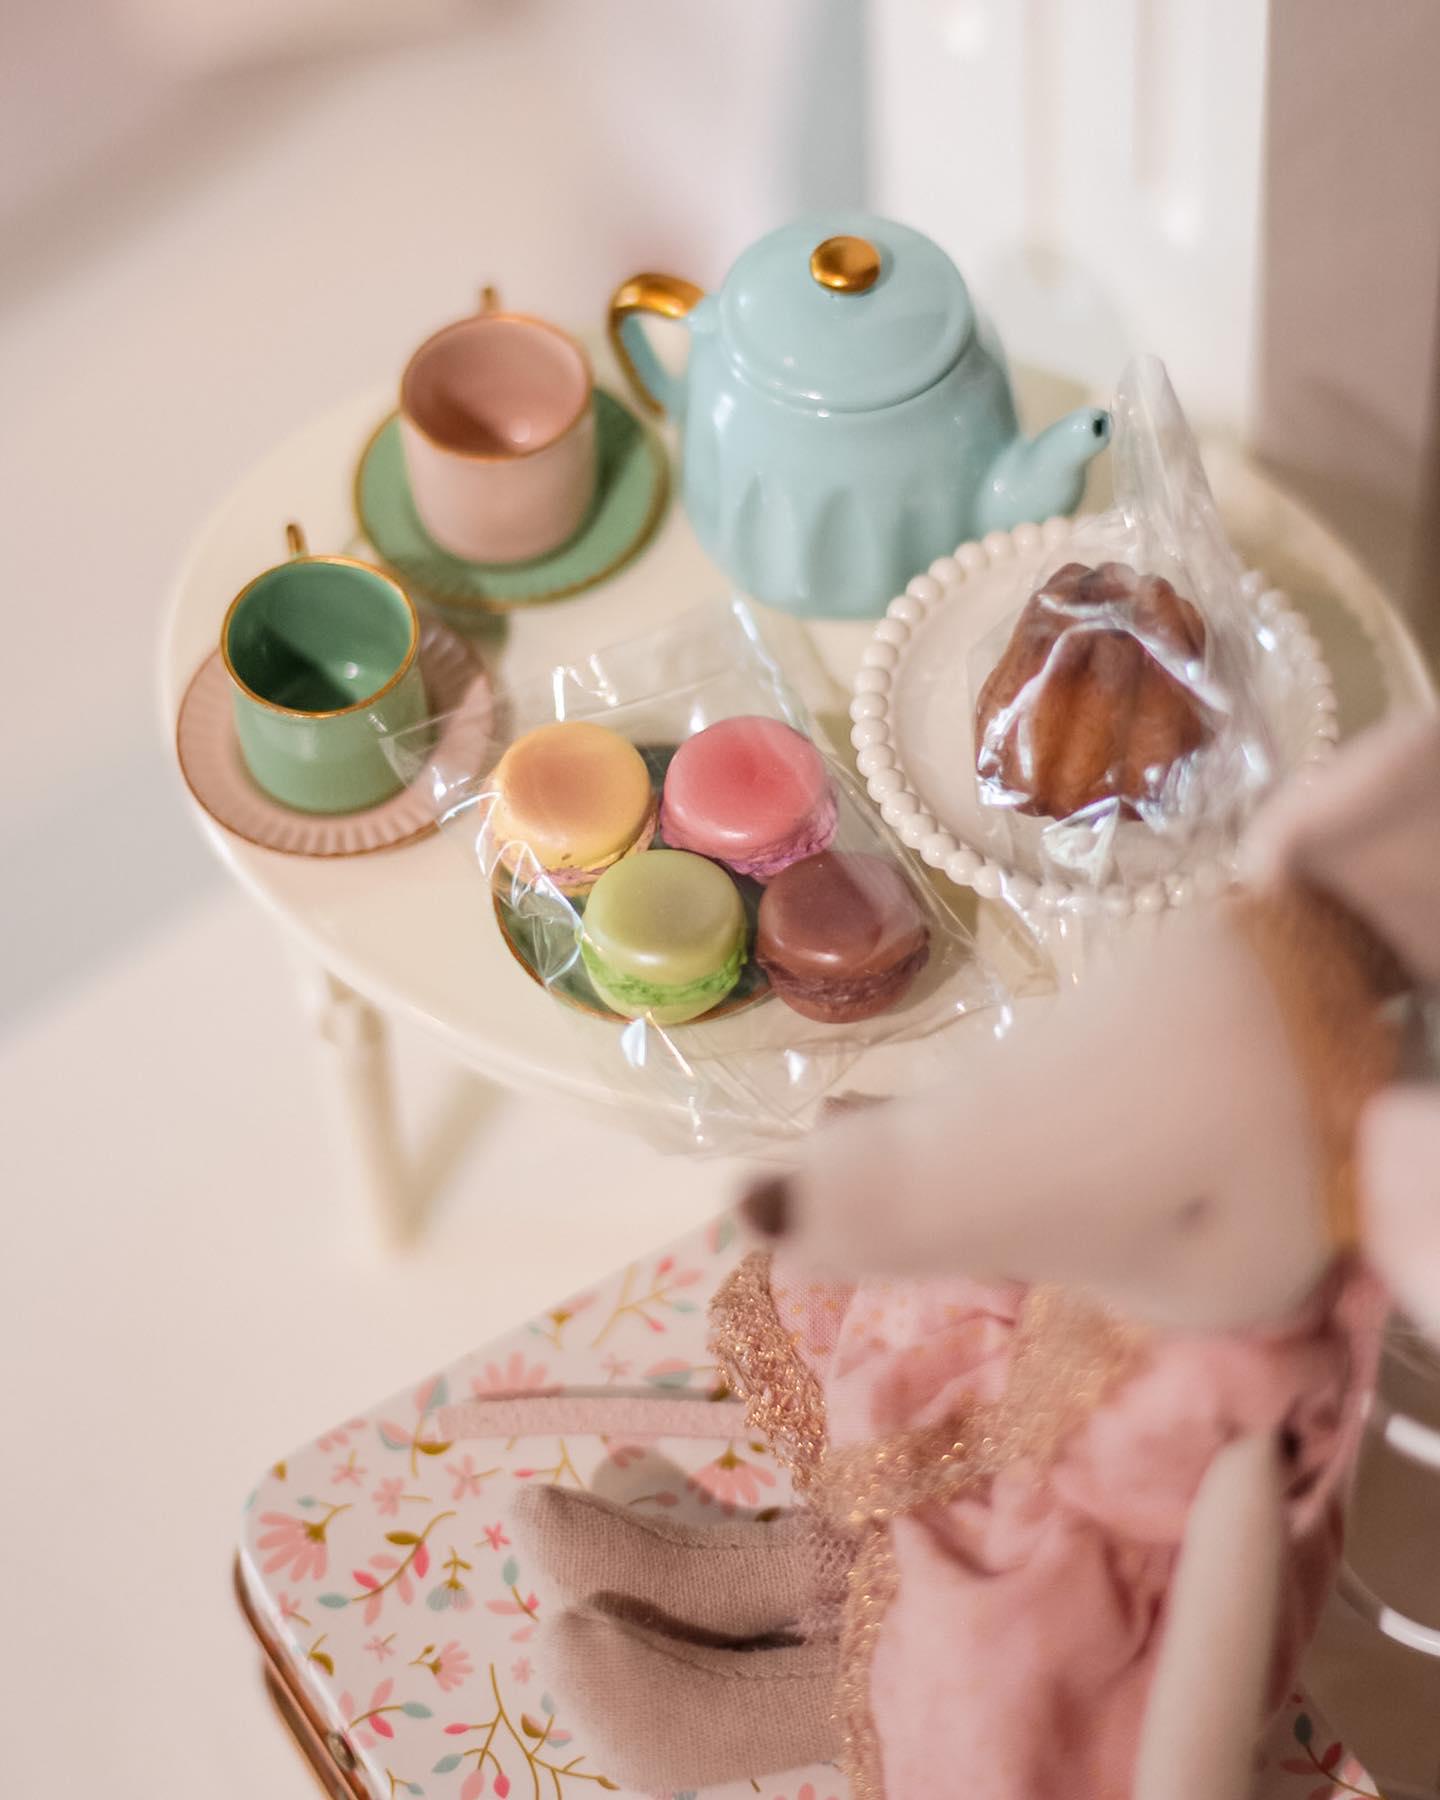 Today feels like the perfect day to cozy up with a tiny mouse tea party!